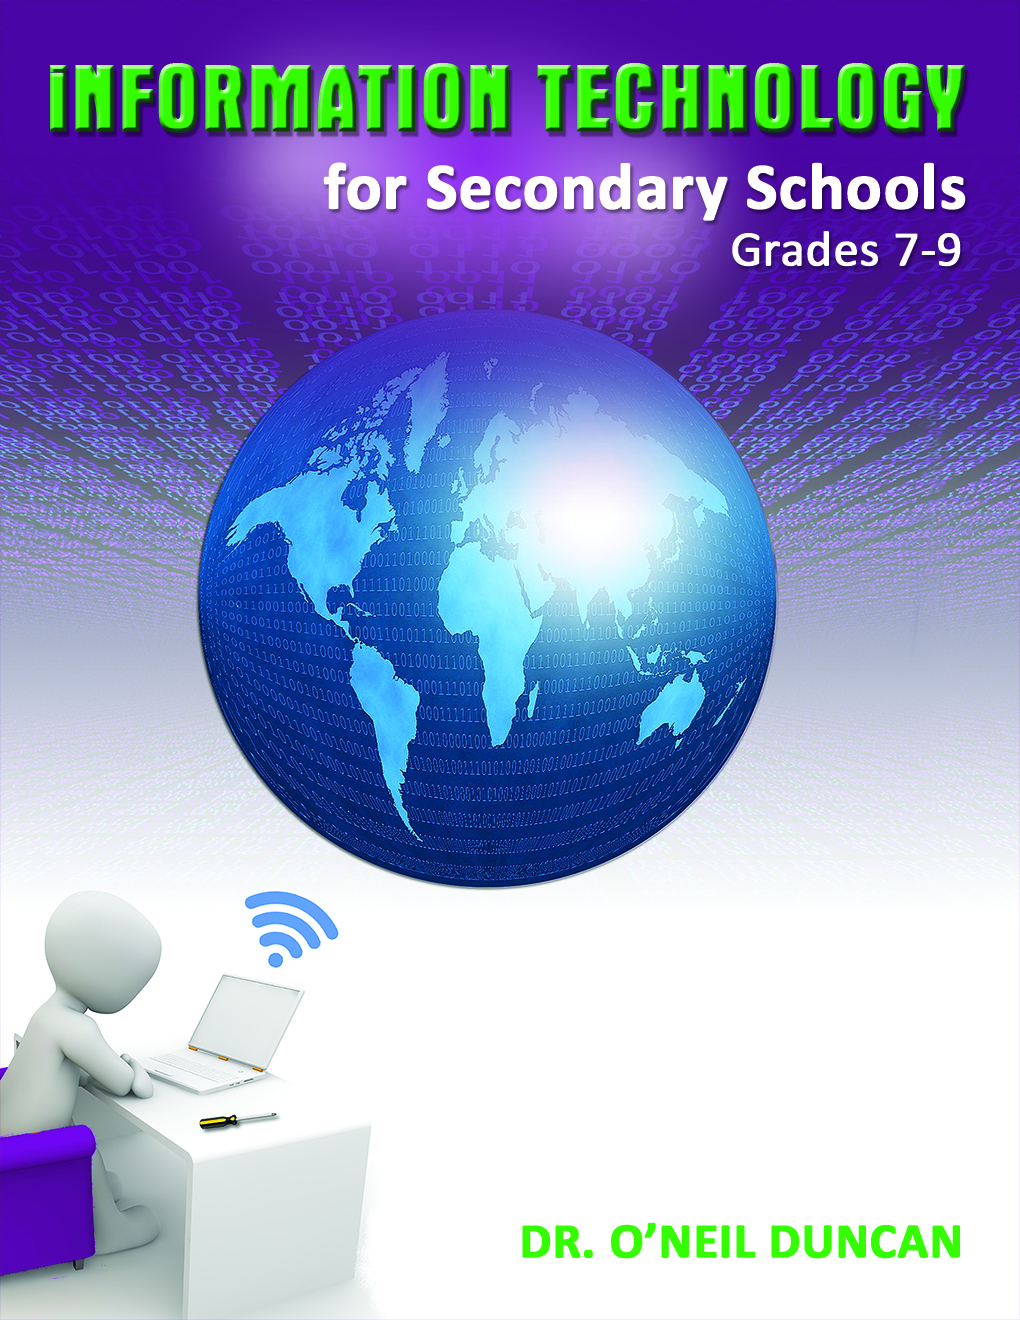 Information Tech for Secondary School G7_9 LOW RES